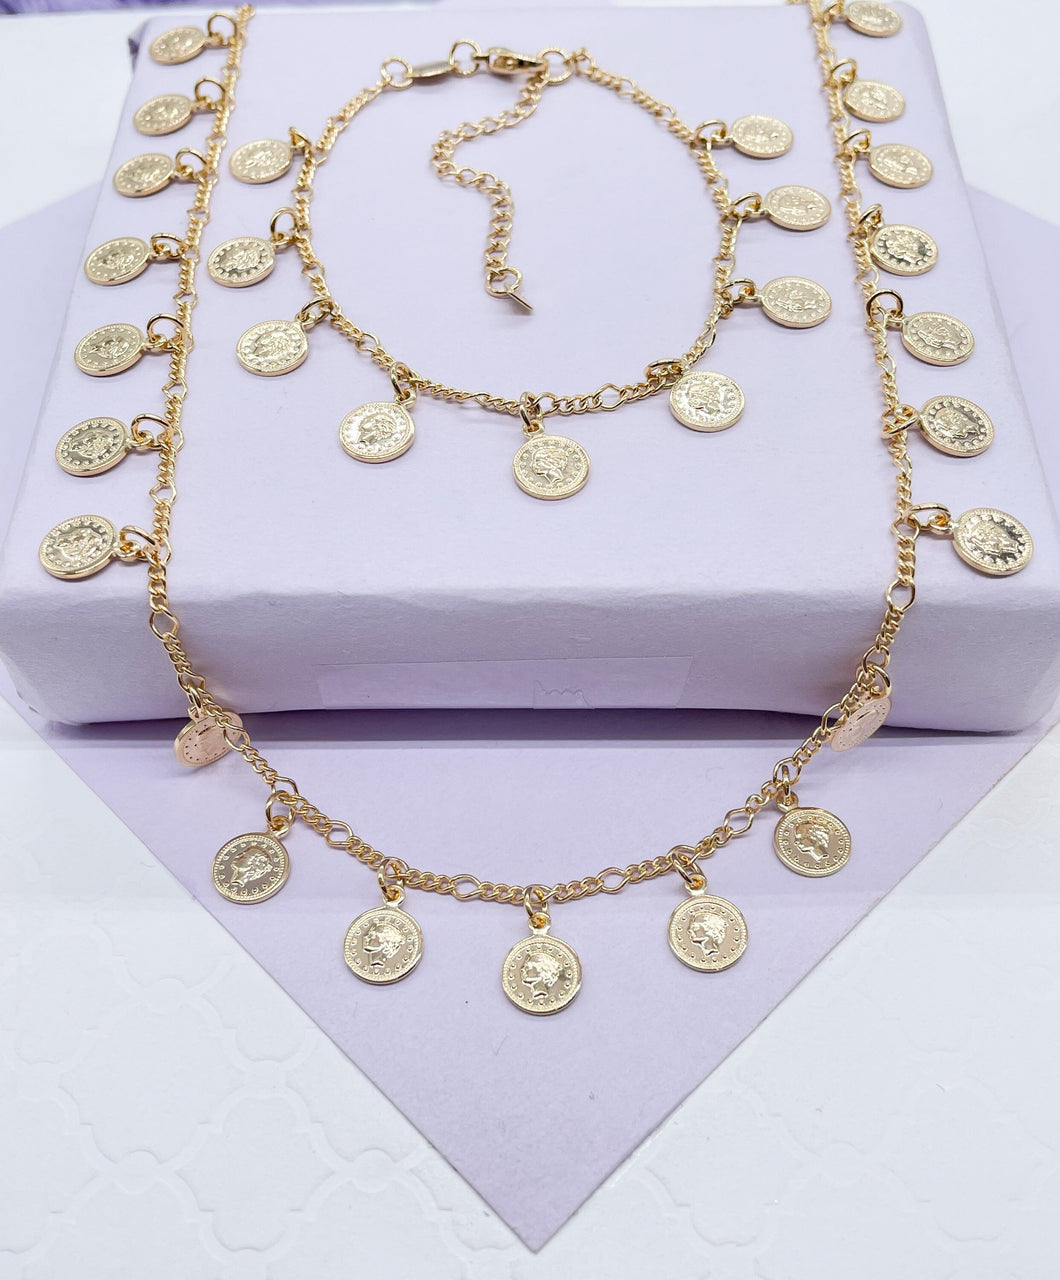 18k GoldFilled Charm Necklace And Bracelet Set With Mini Medallion Charms